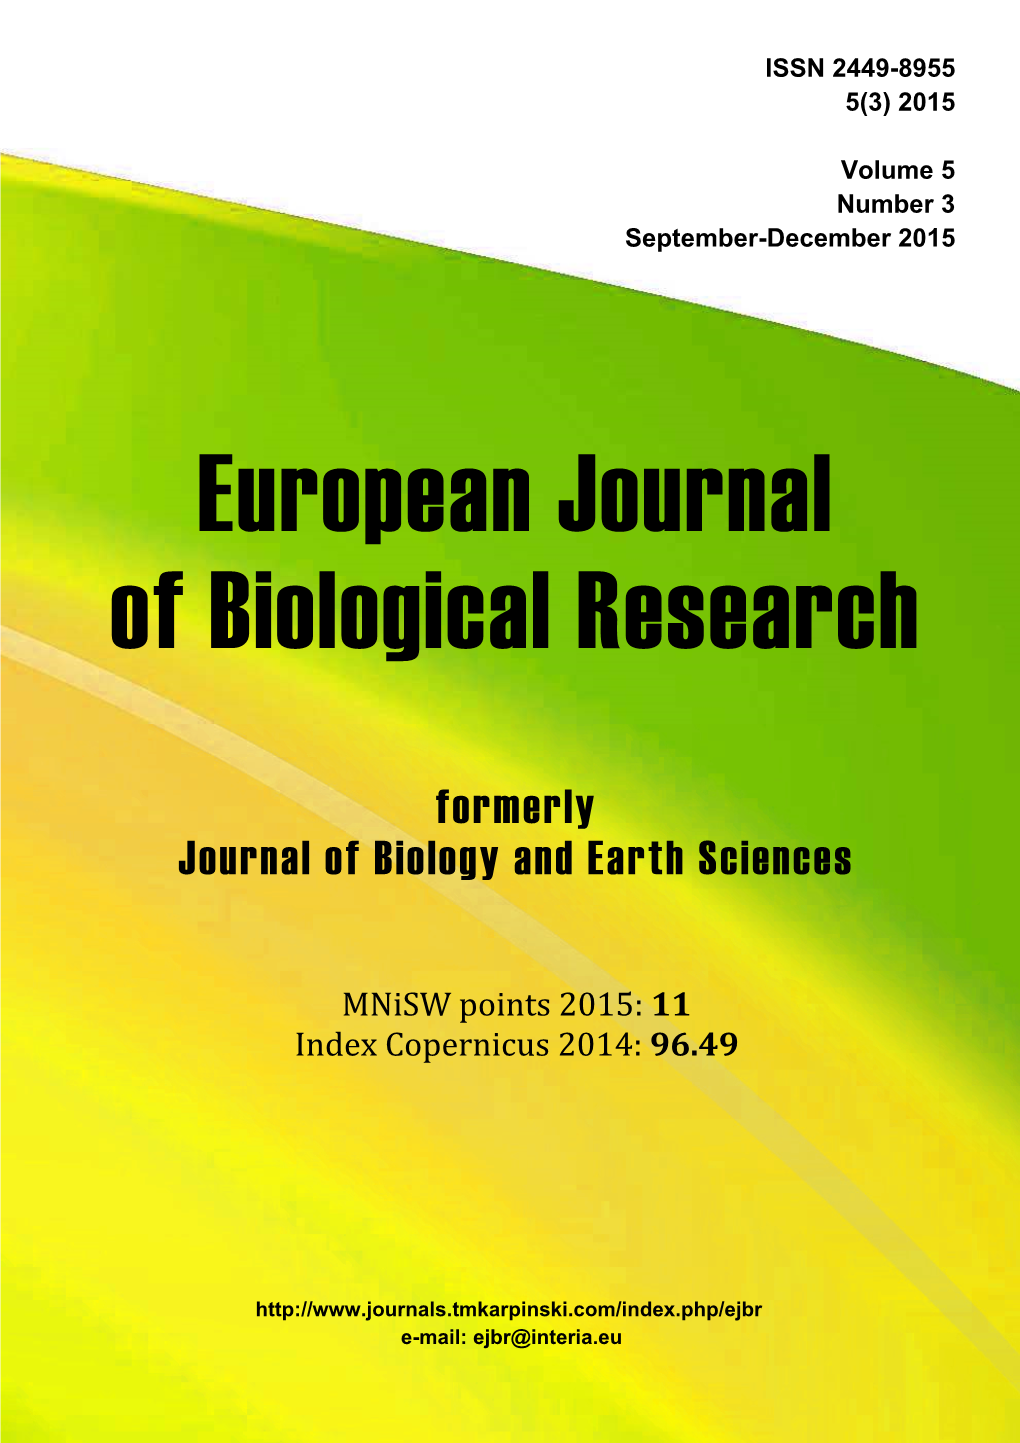 European Journal of Biological Research